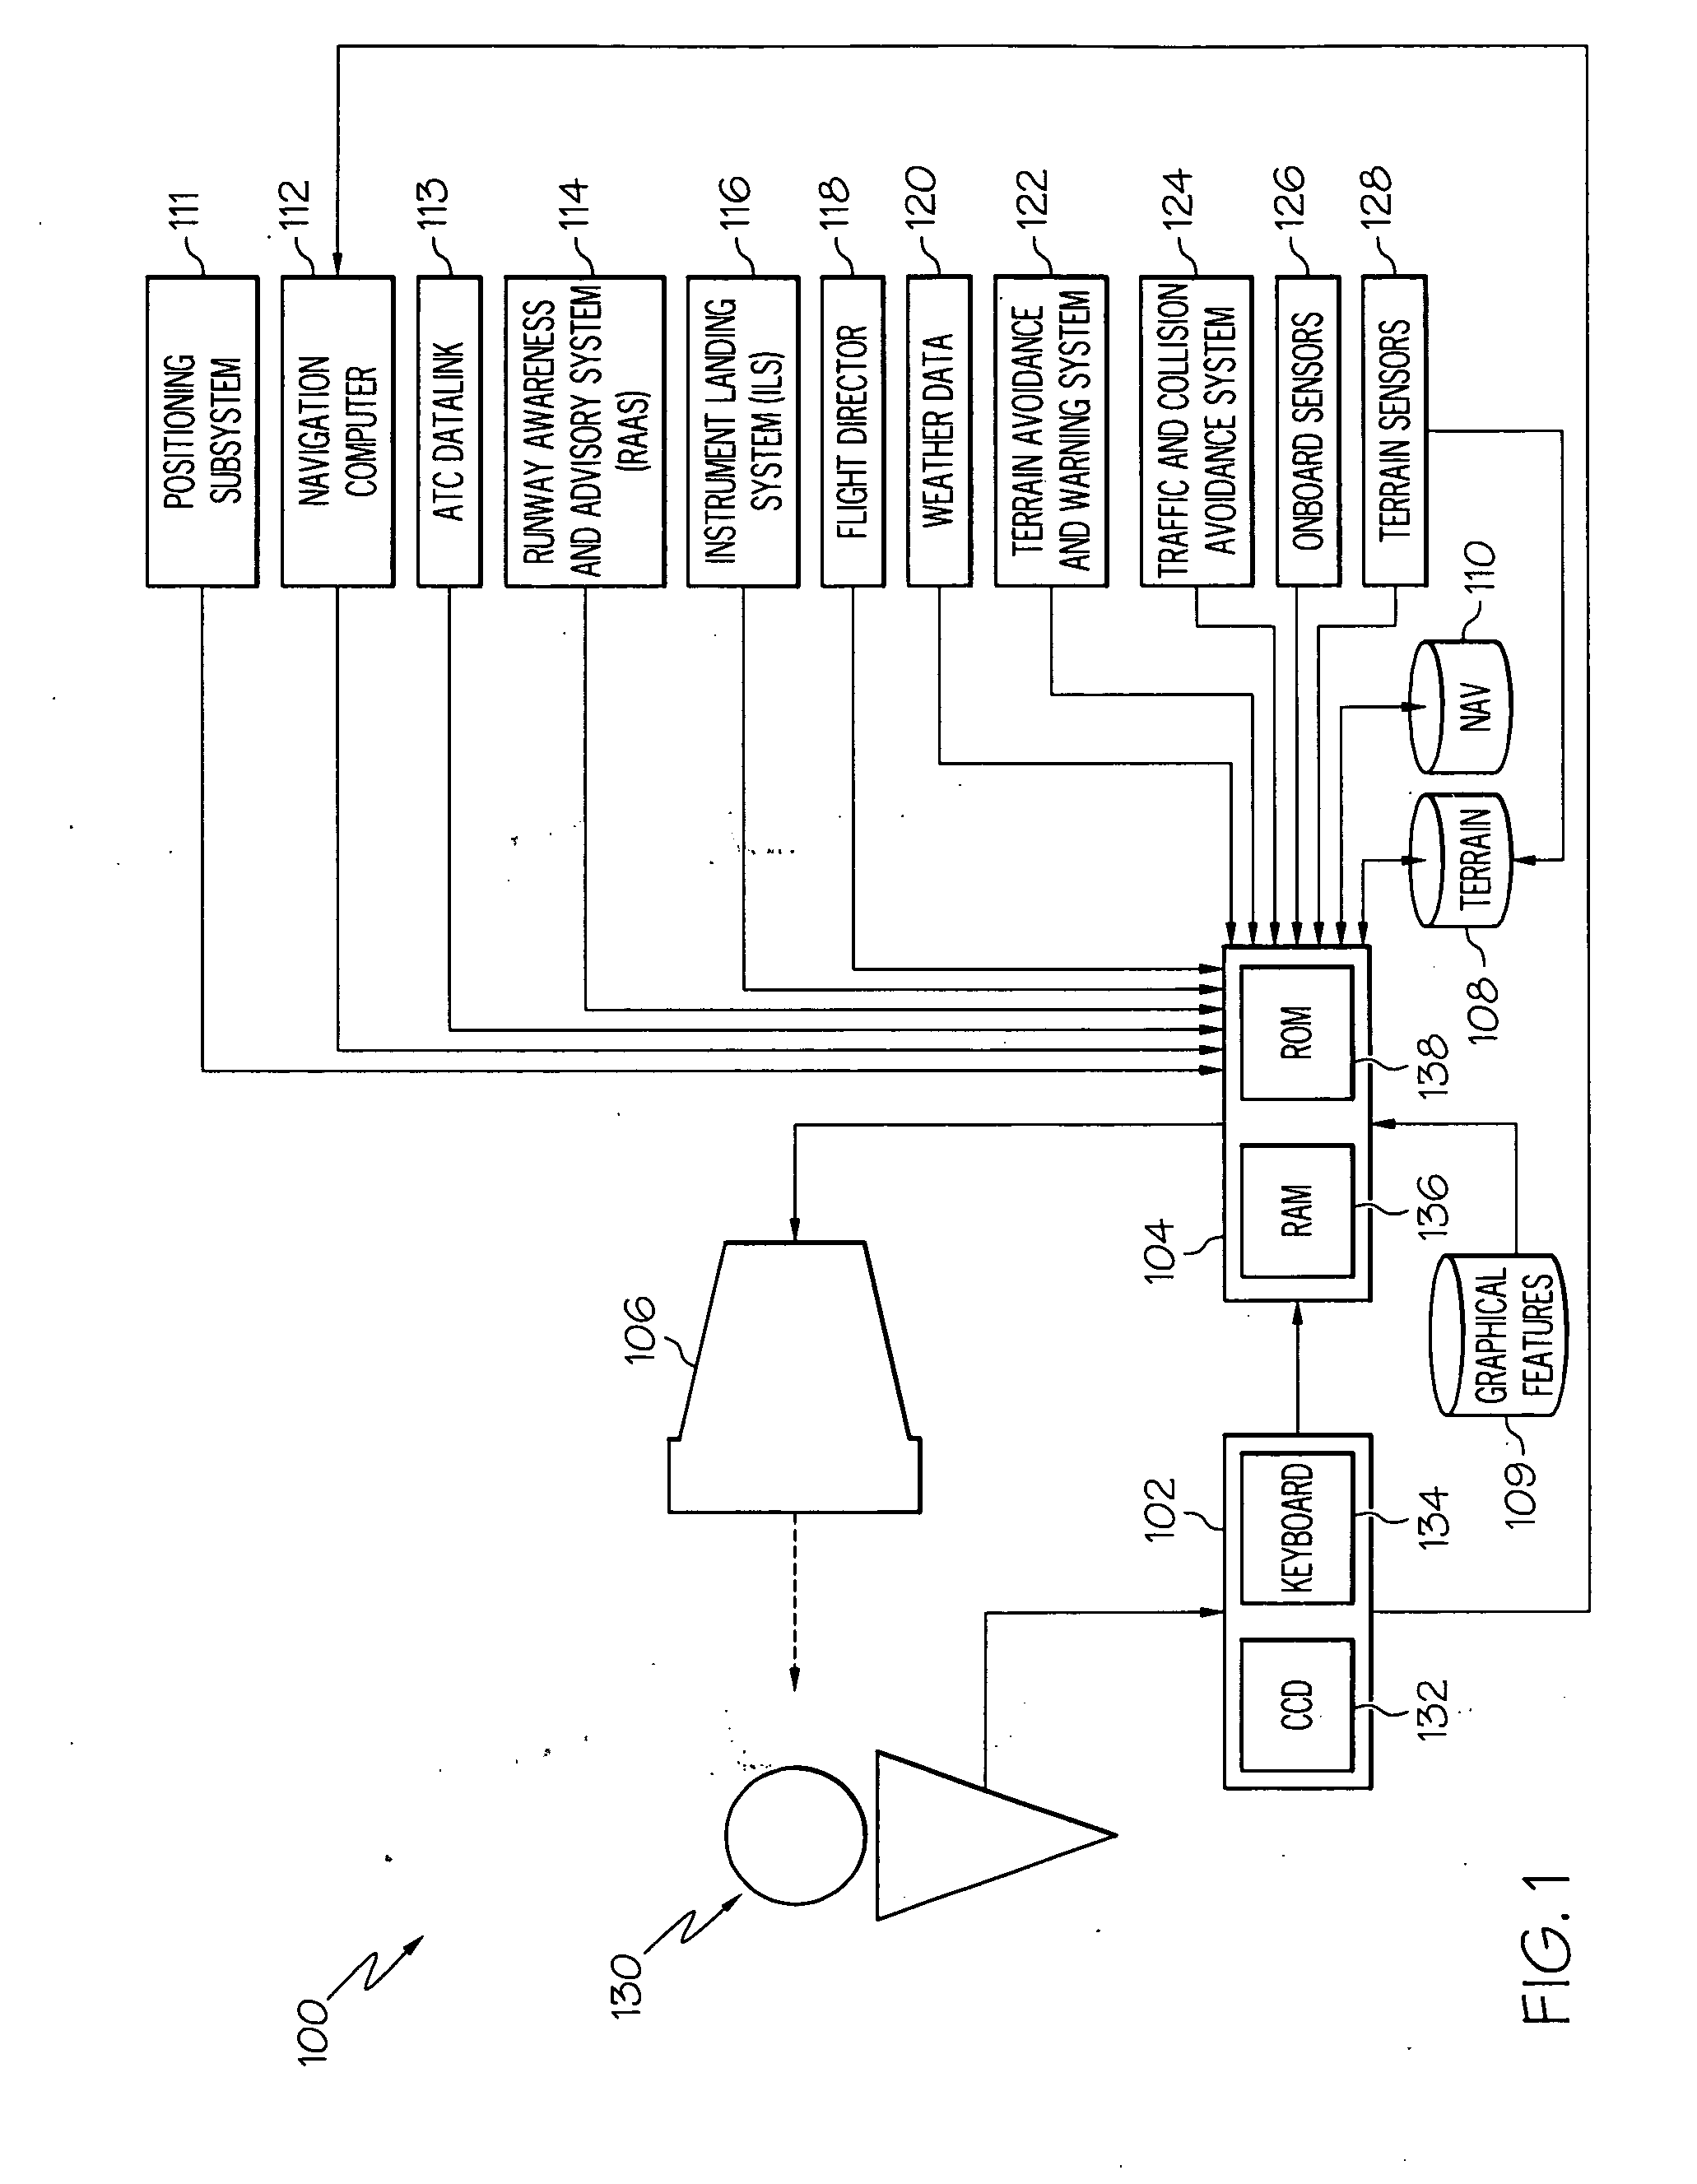 System and method for rendering visible features of a target location on a synthetic flight display